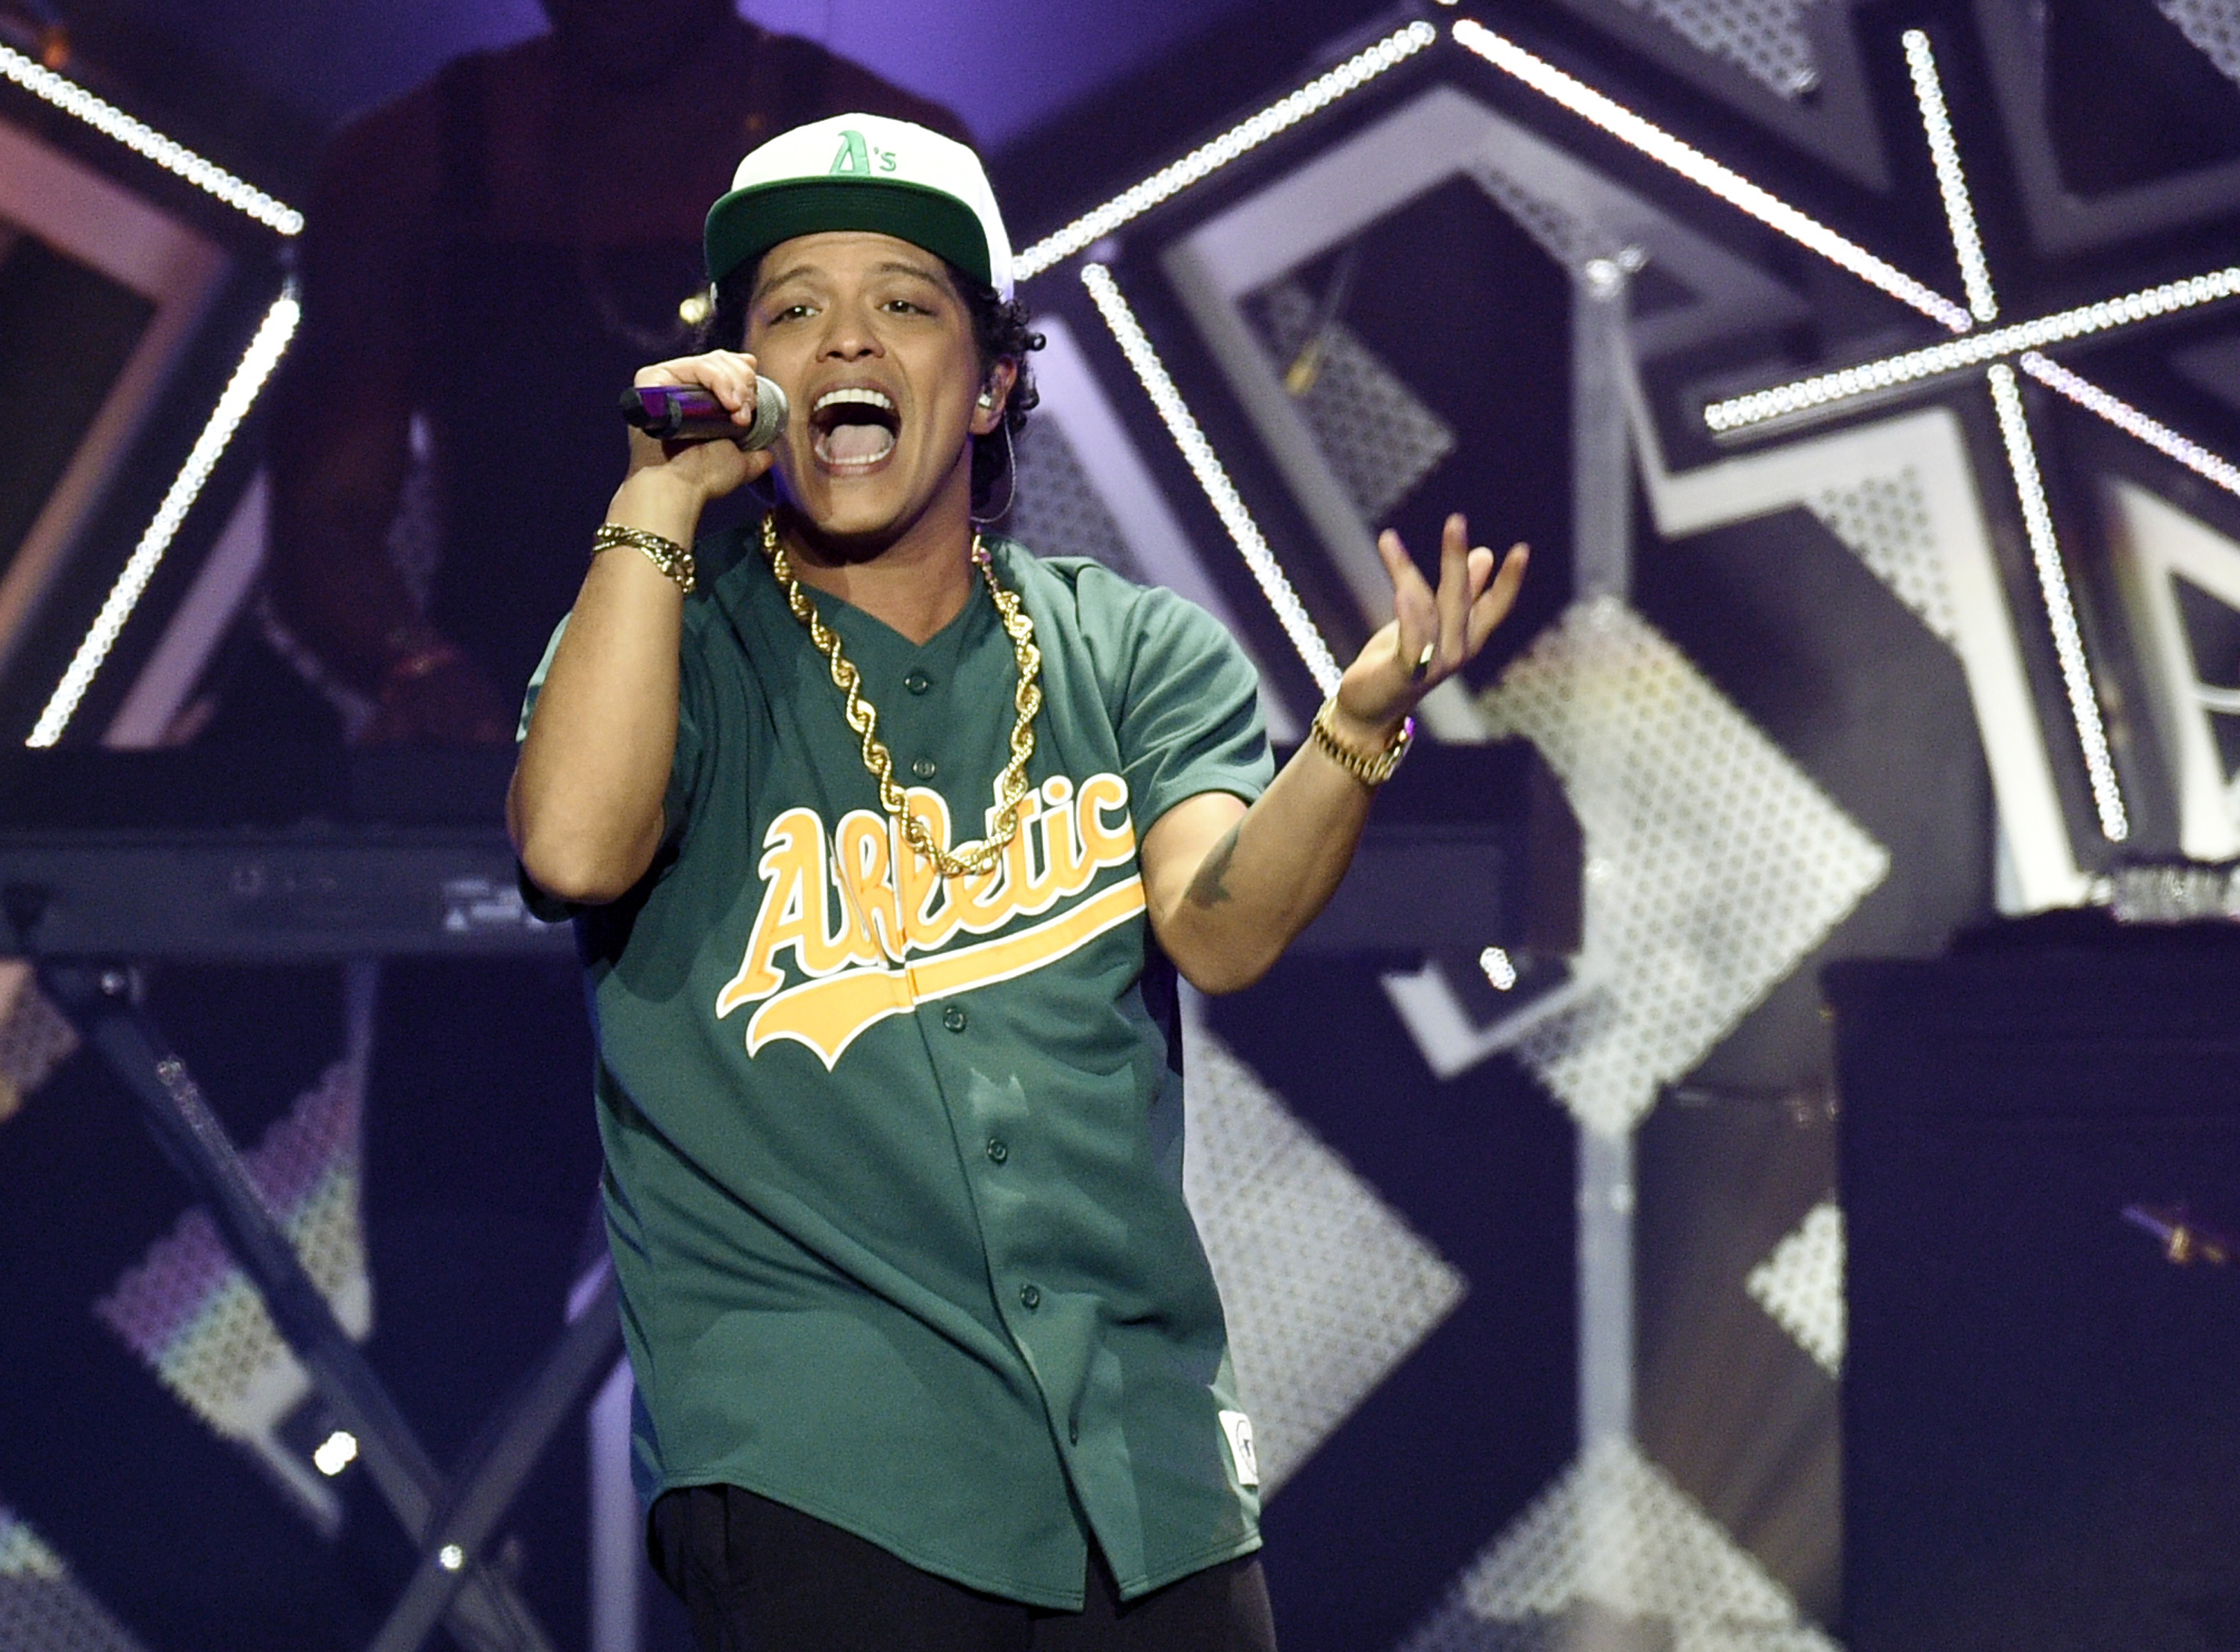 FILE - In this Friday, Dec. 2, 2016, file photo, Bruno Mars performs at the 2016 Jingle Ball at Staples Center in Los Angeles. Drake leads the nominations for the 2017 iHeartRadio Music Awards with 12, including male artist of the year, while electronic duo The Chainsmokers picked up 11 nominations, including song of the year for “Closer.” iHeartMedia and Turner also announced Wednesday, Jan. 4, 2017, that Bruno Mars will perform at the awards show held March 5, 2017, in Los Angeles. (Photo by Chris Pizzello/Invision/AP, File)